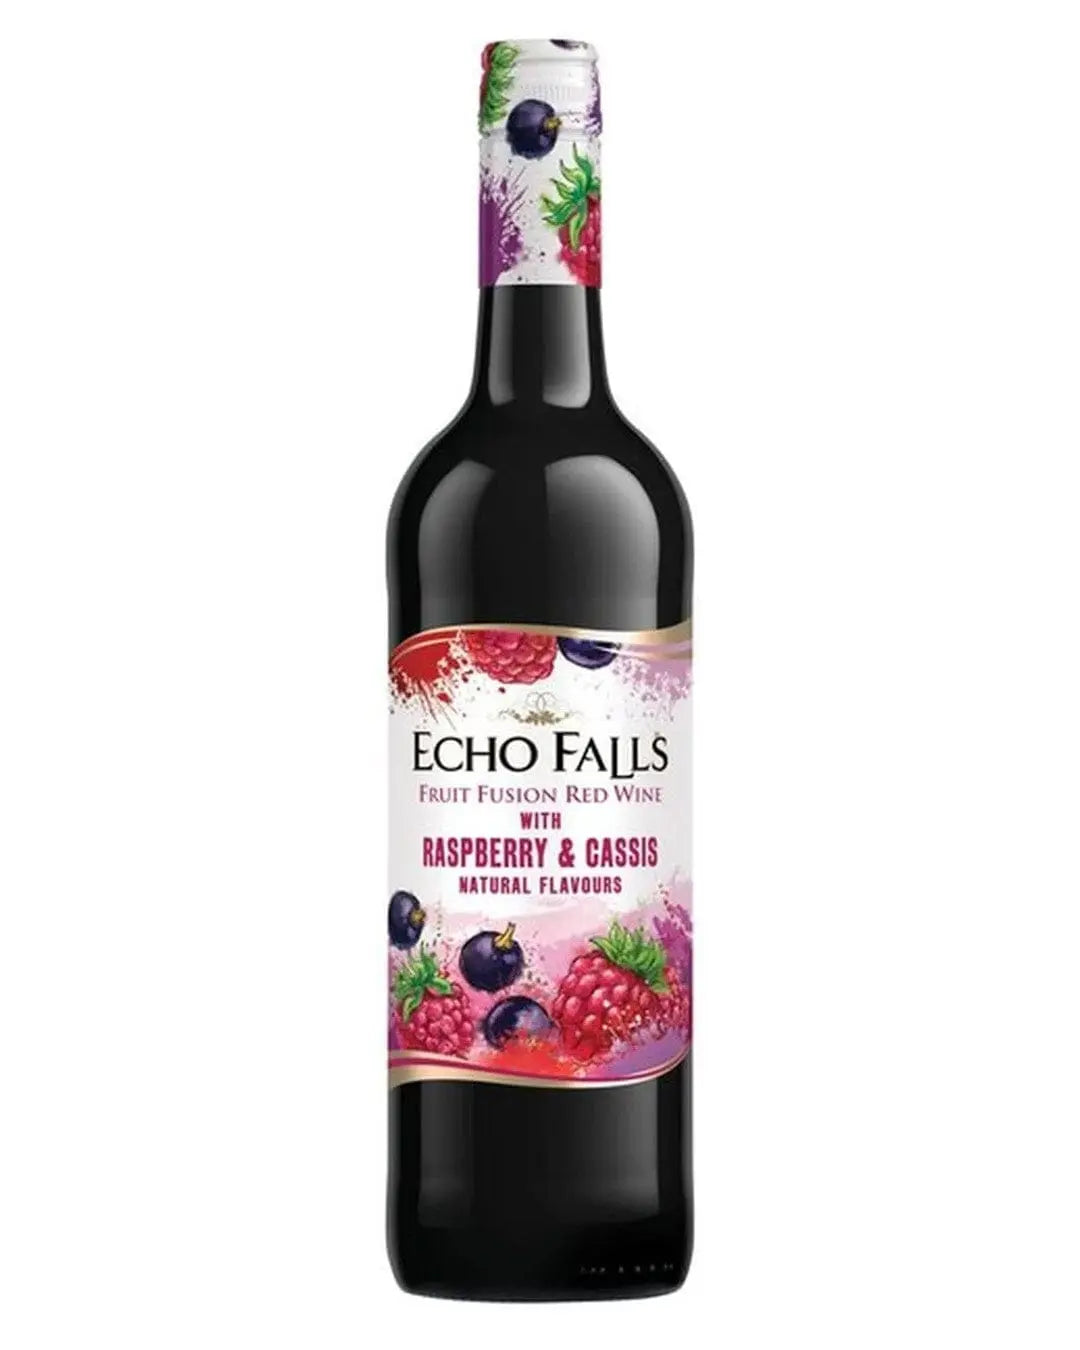 Echo Falls Raspberry & Cassis Fruit Fusion, 187ml Red Wine